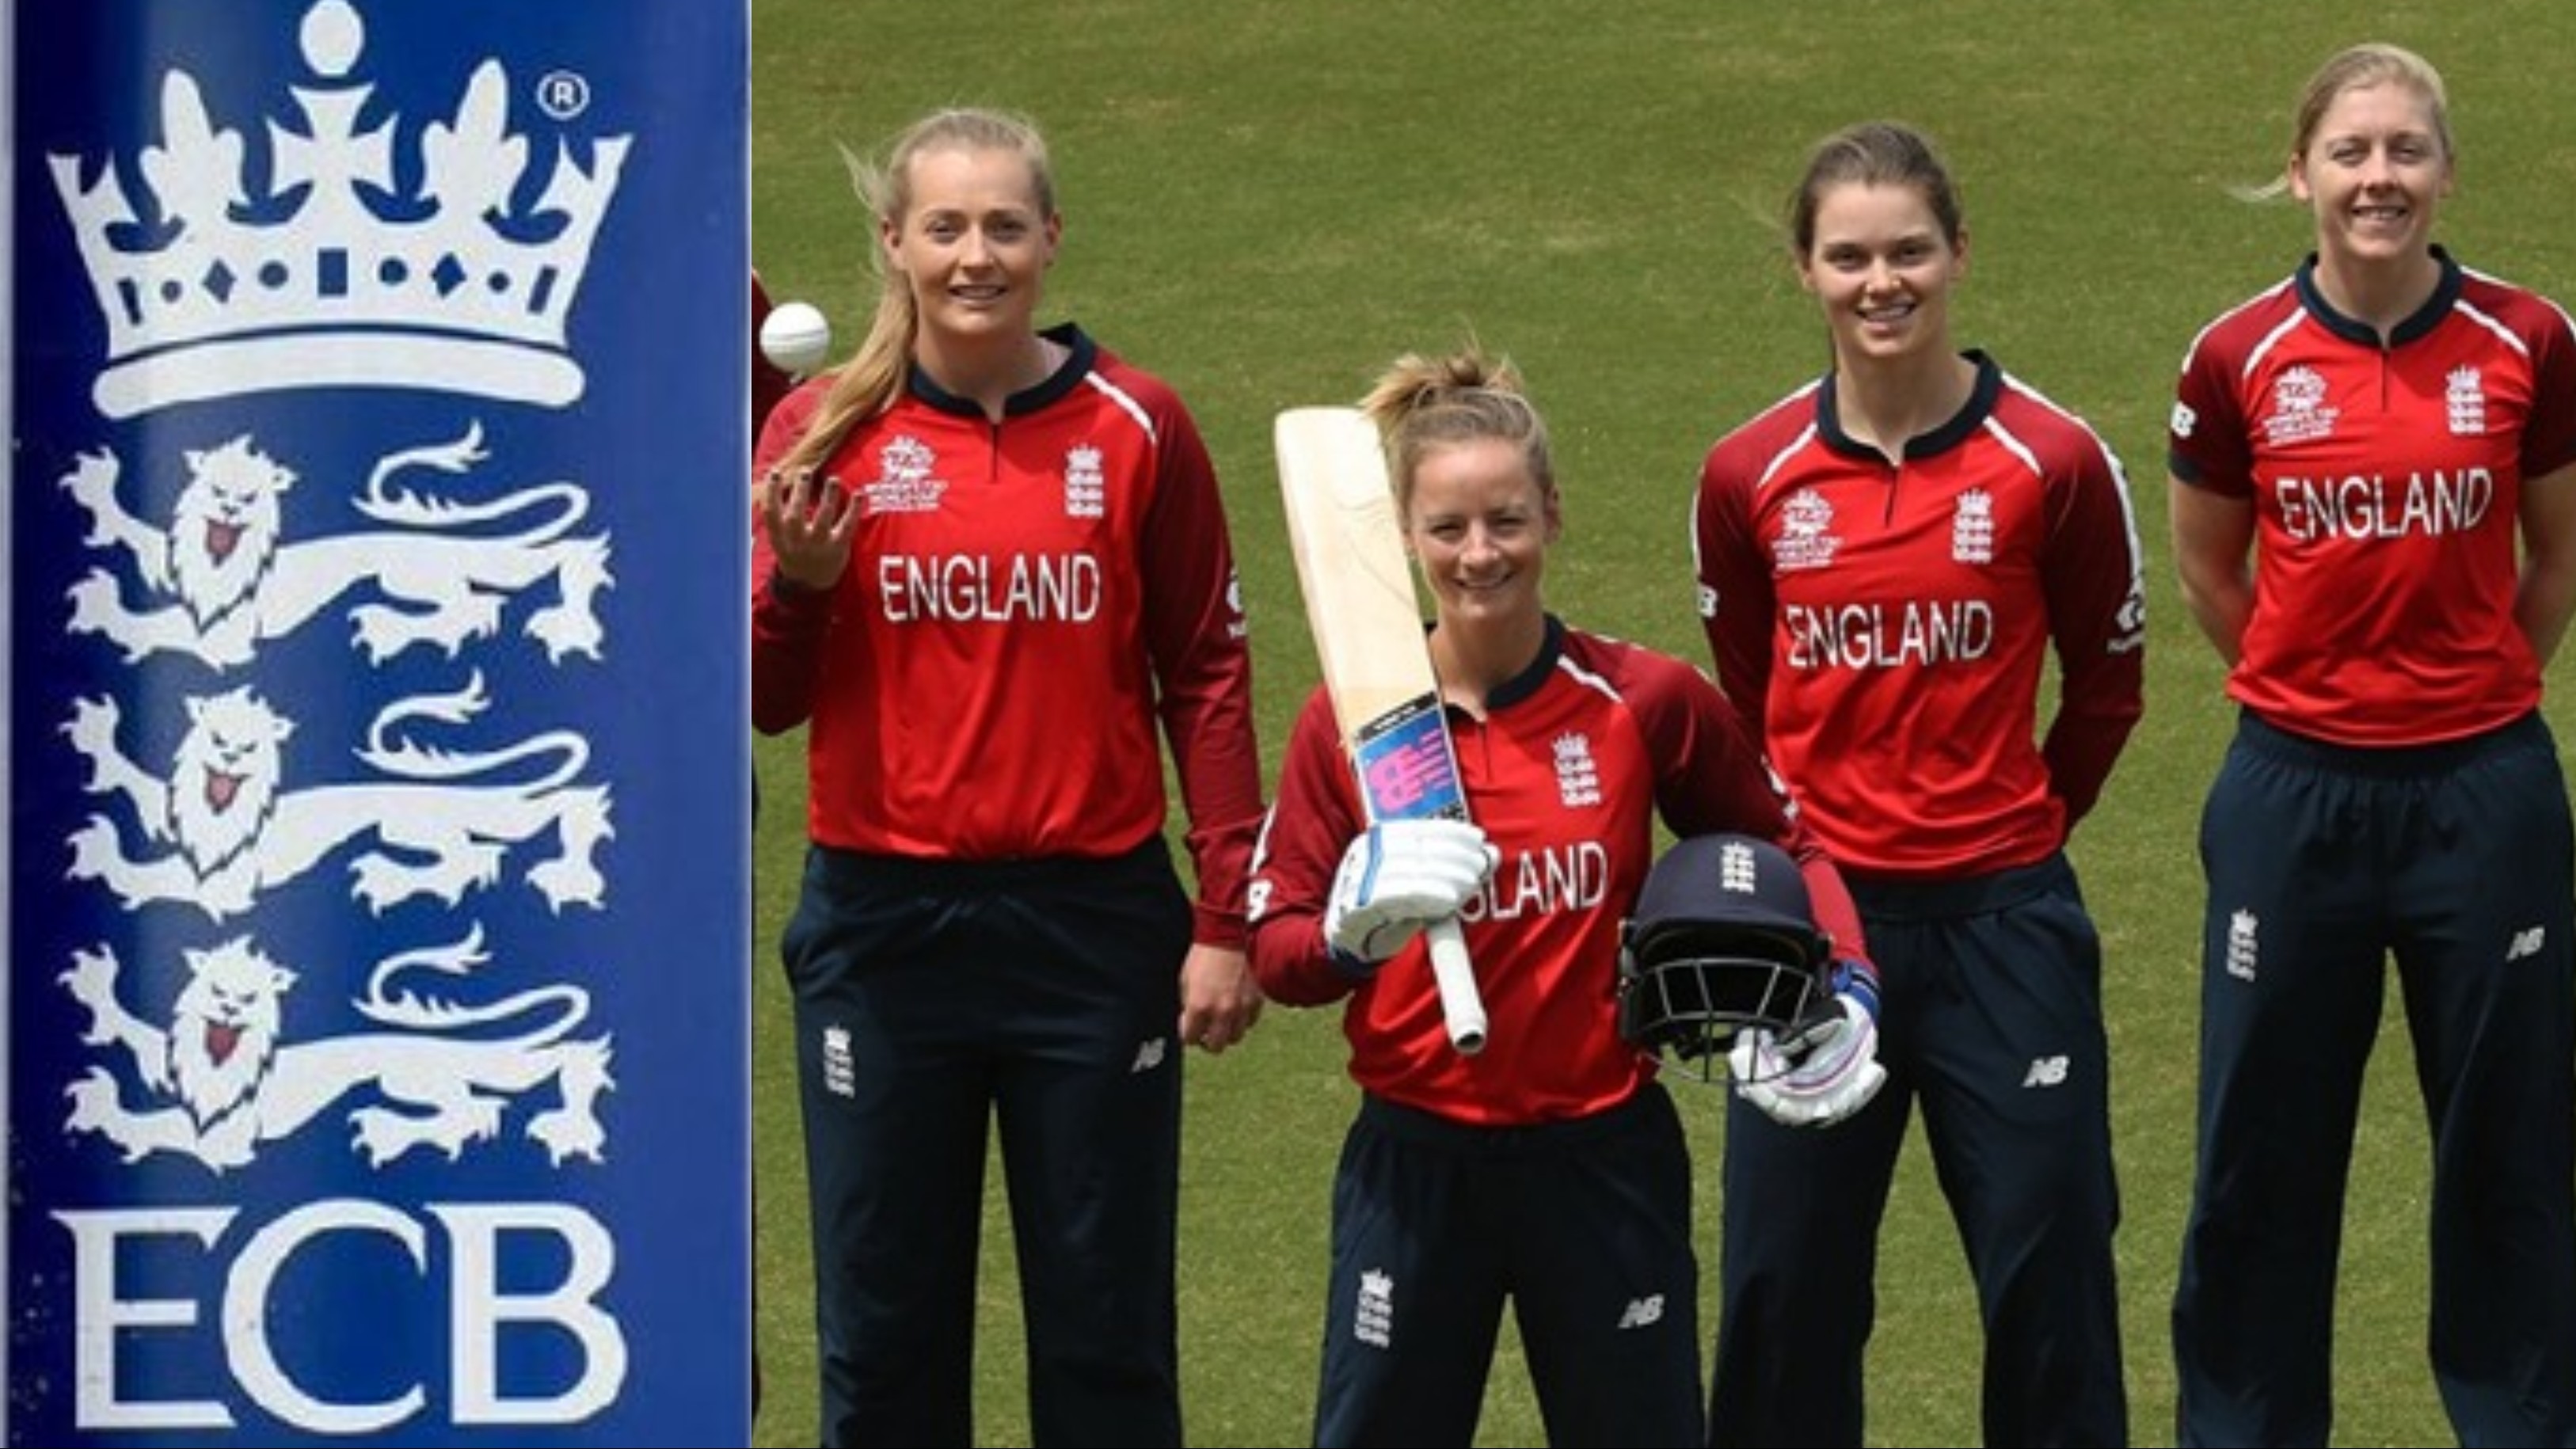 England Women to return to training next week as ECB continue plans for Tri-series with India and South Africa